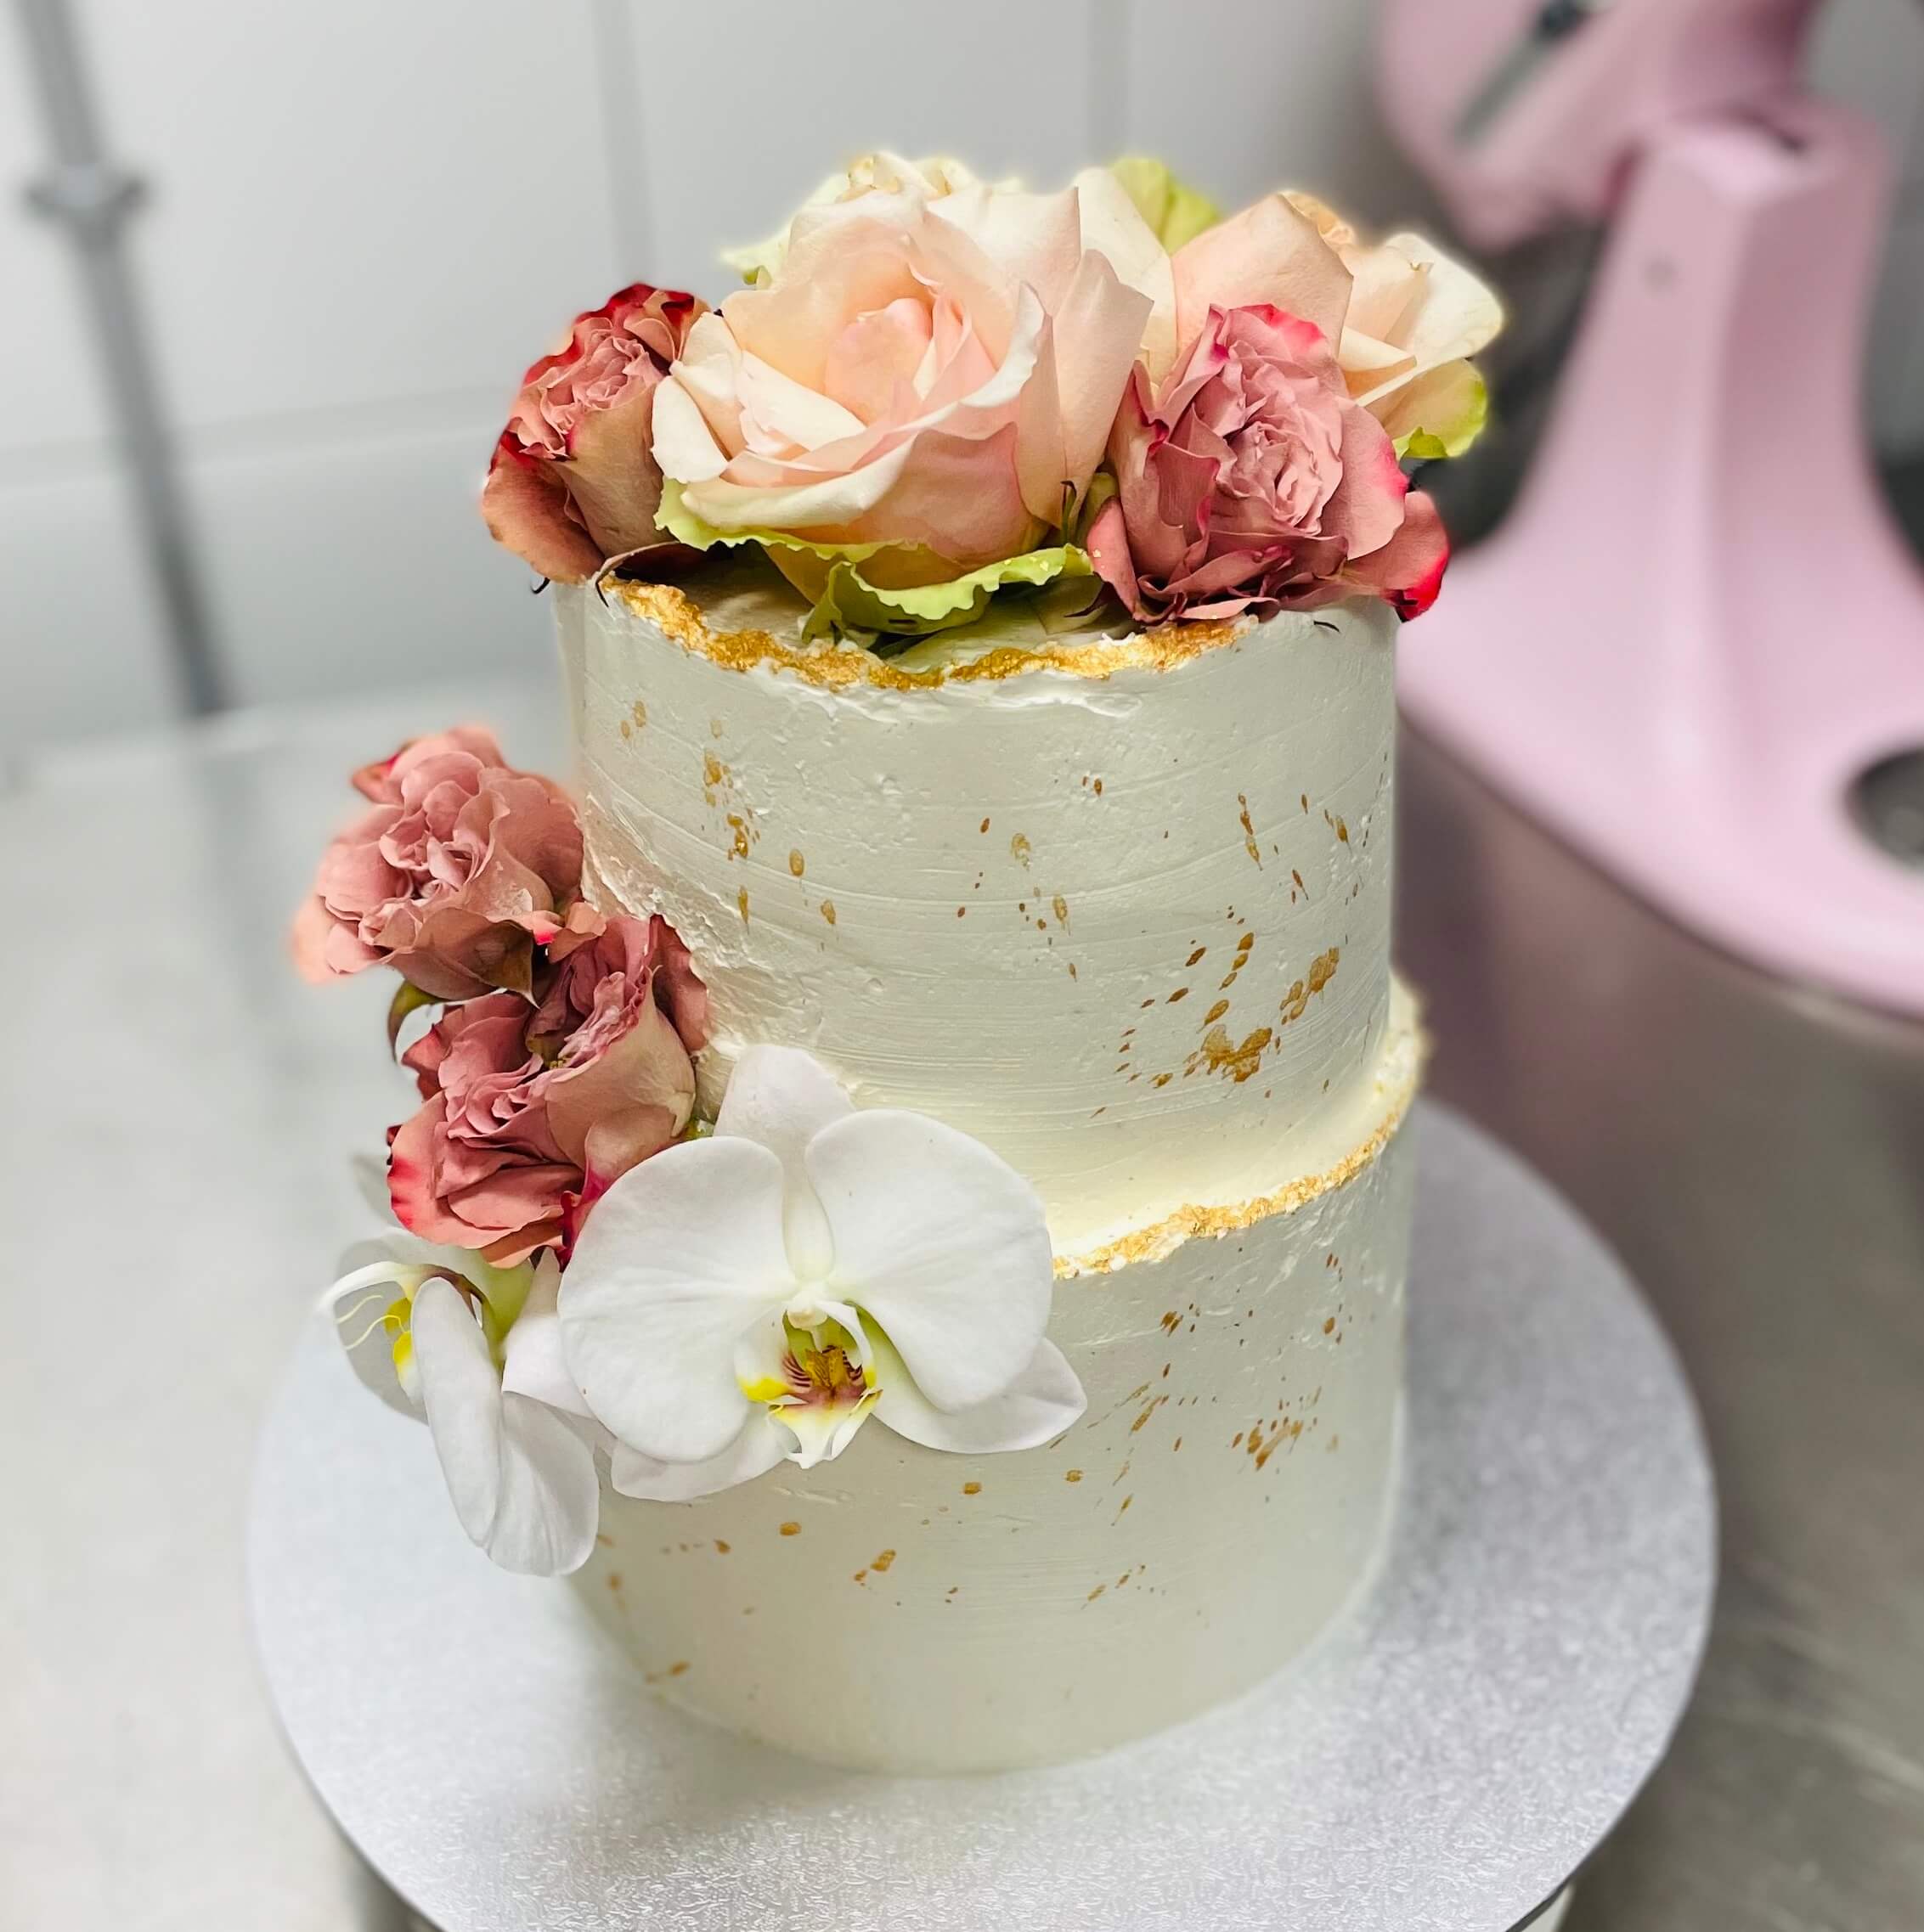 Wedding Cake Bakeries in Durham, NC - The Knot